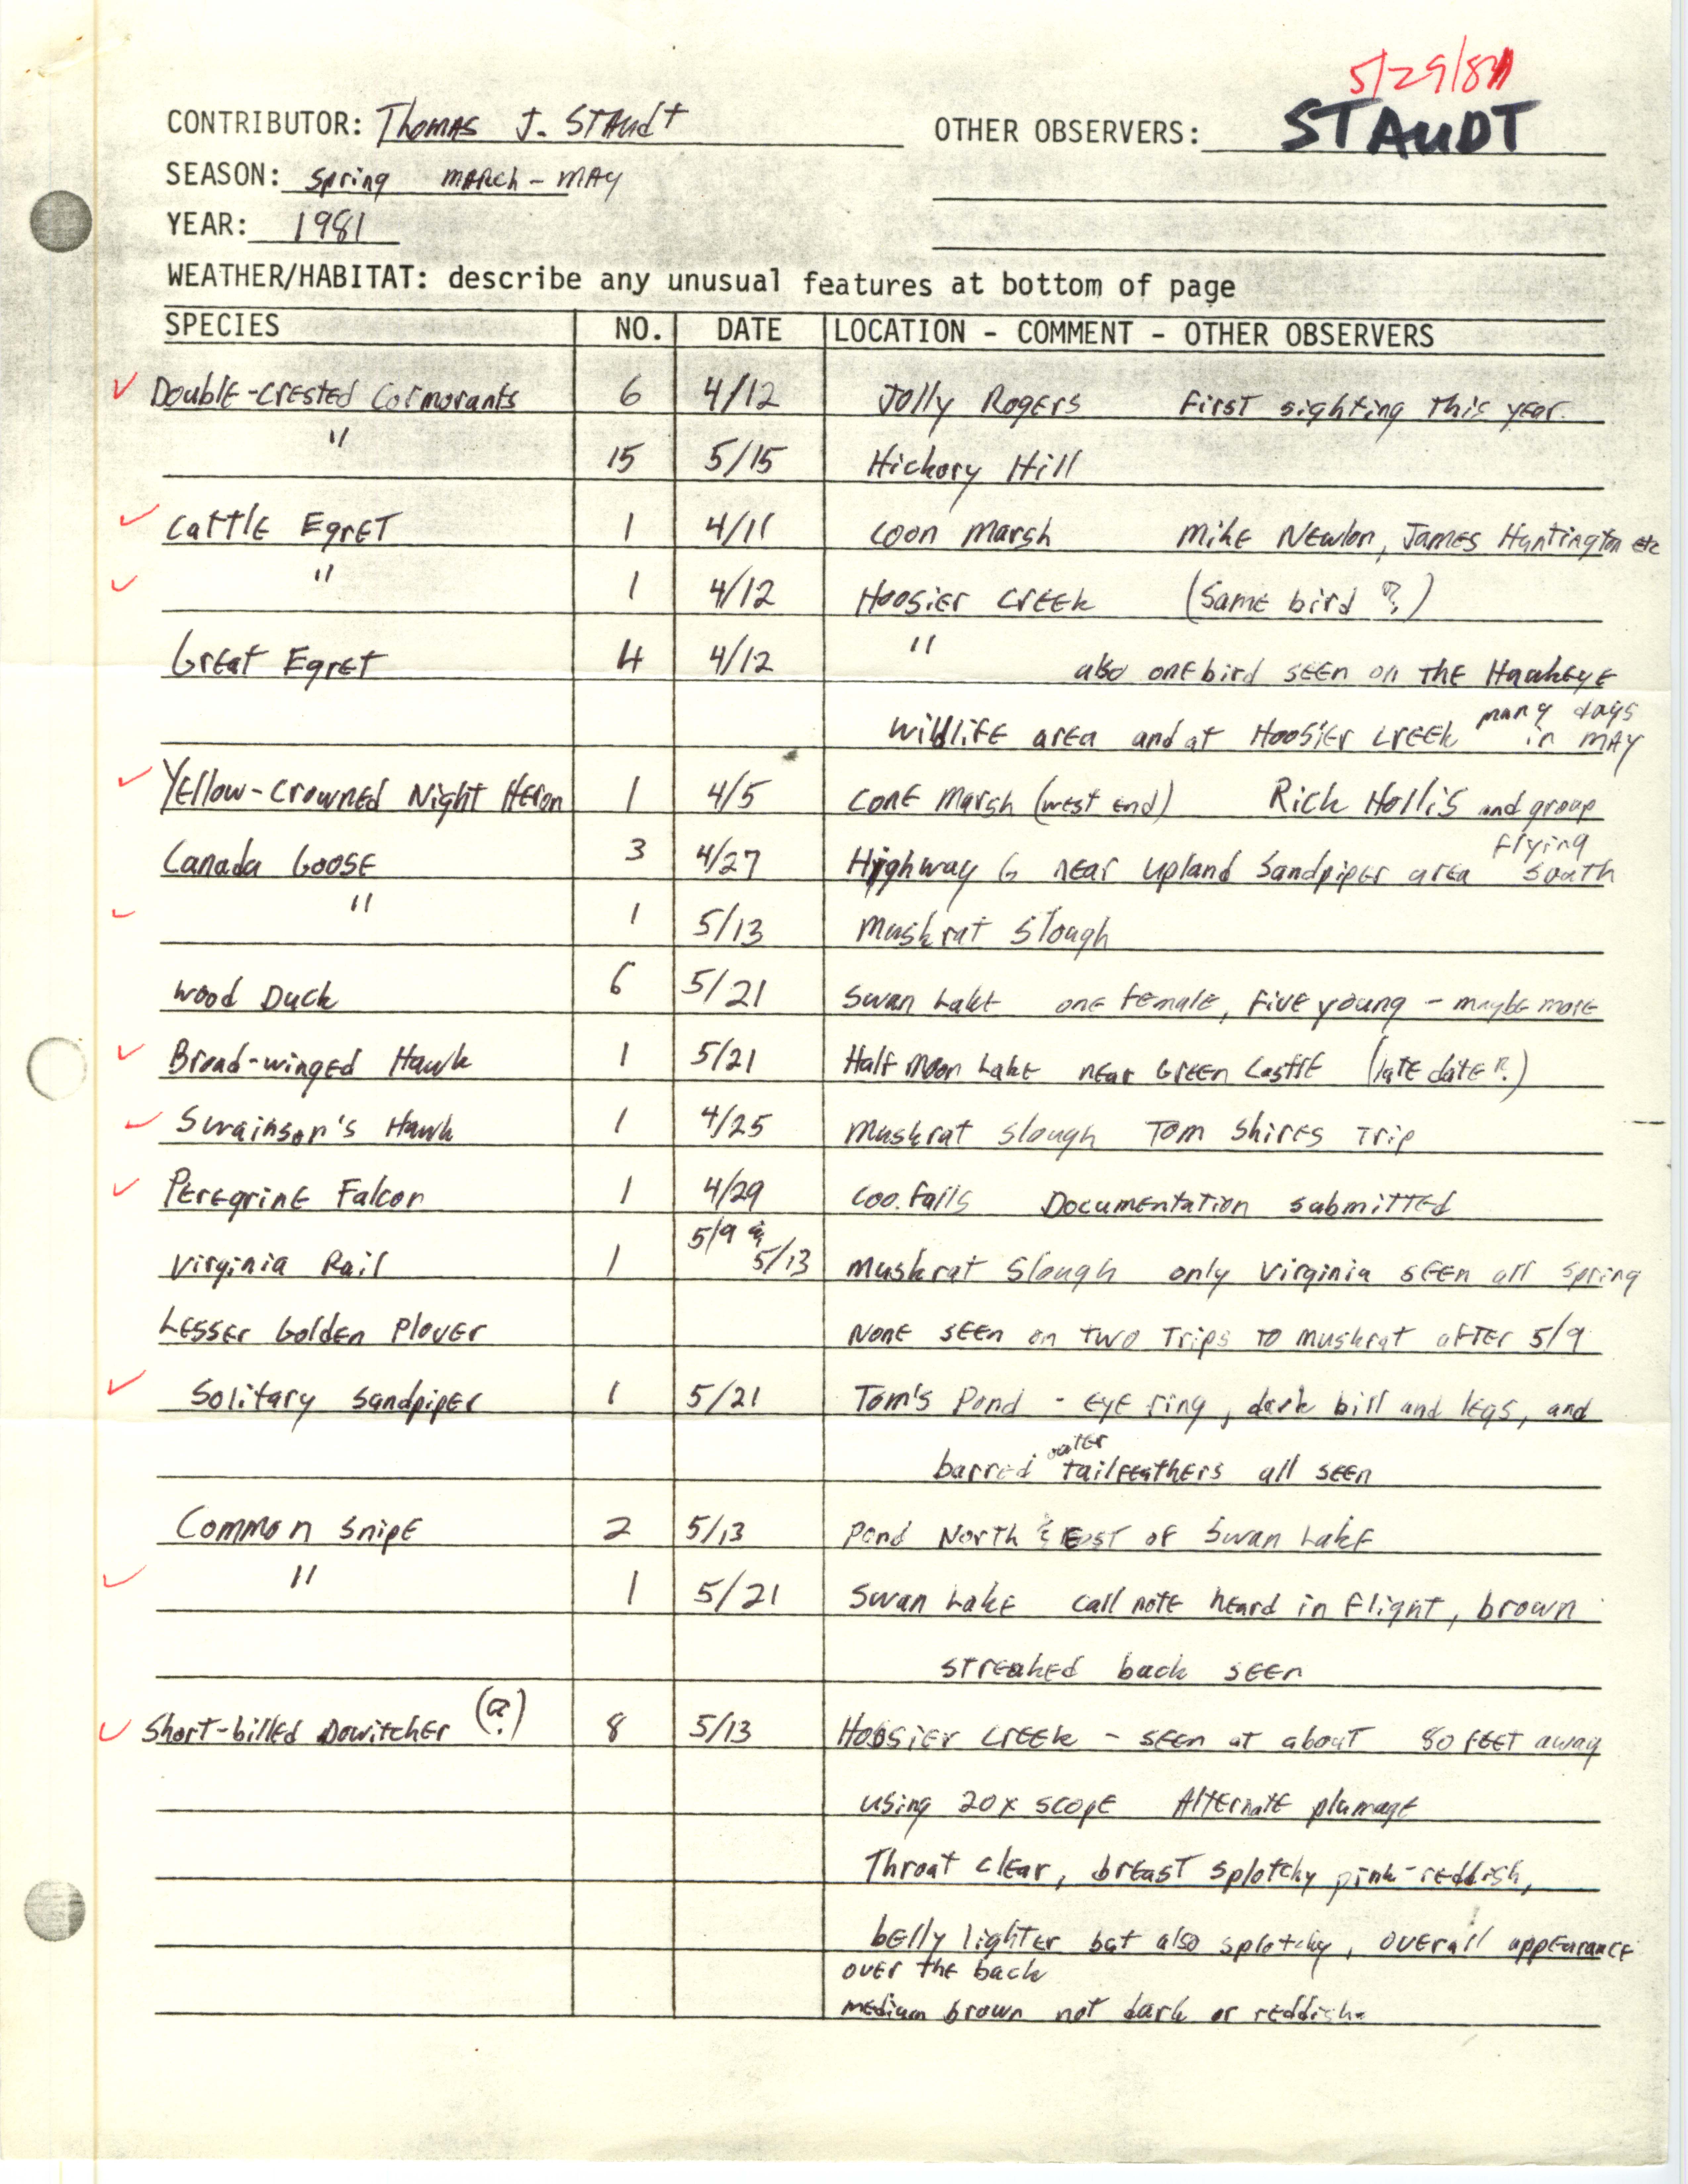 Annotated bird sighting list for spring 1981 compiled by Thomas Staudt